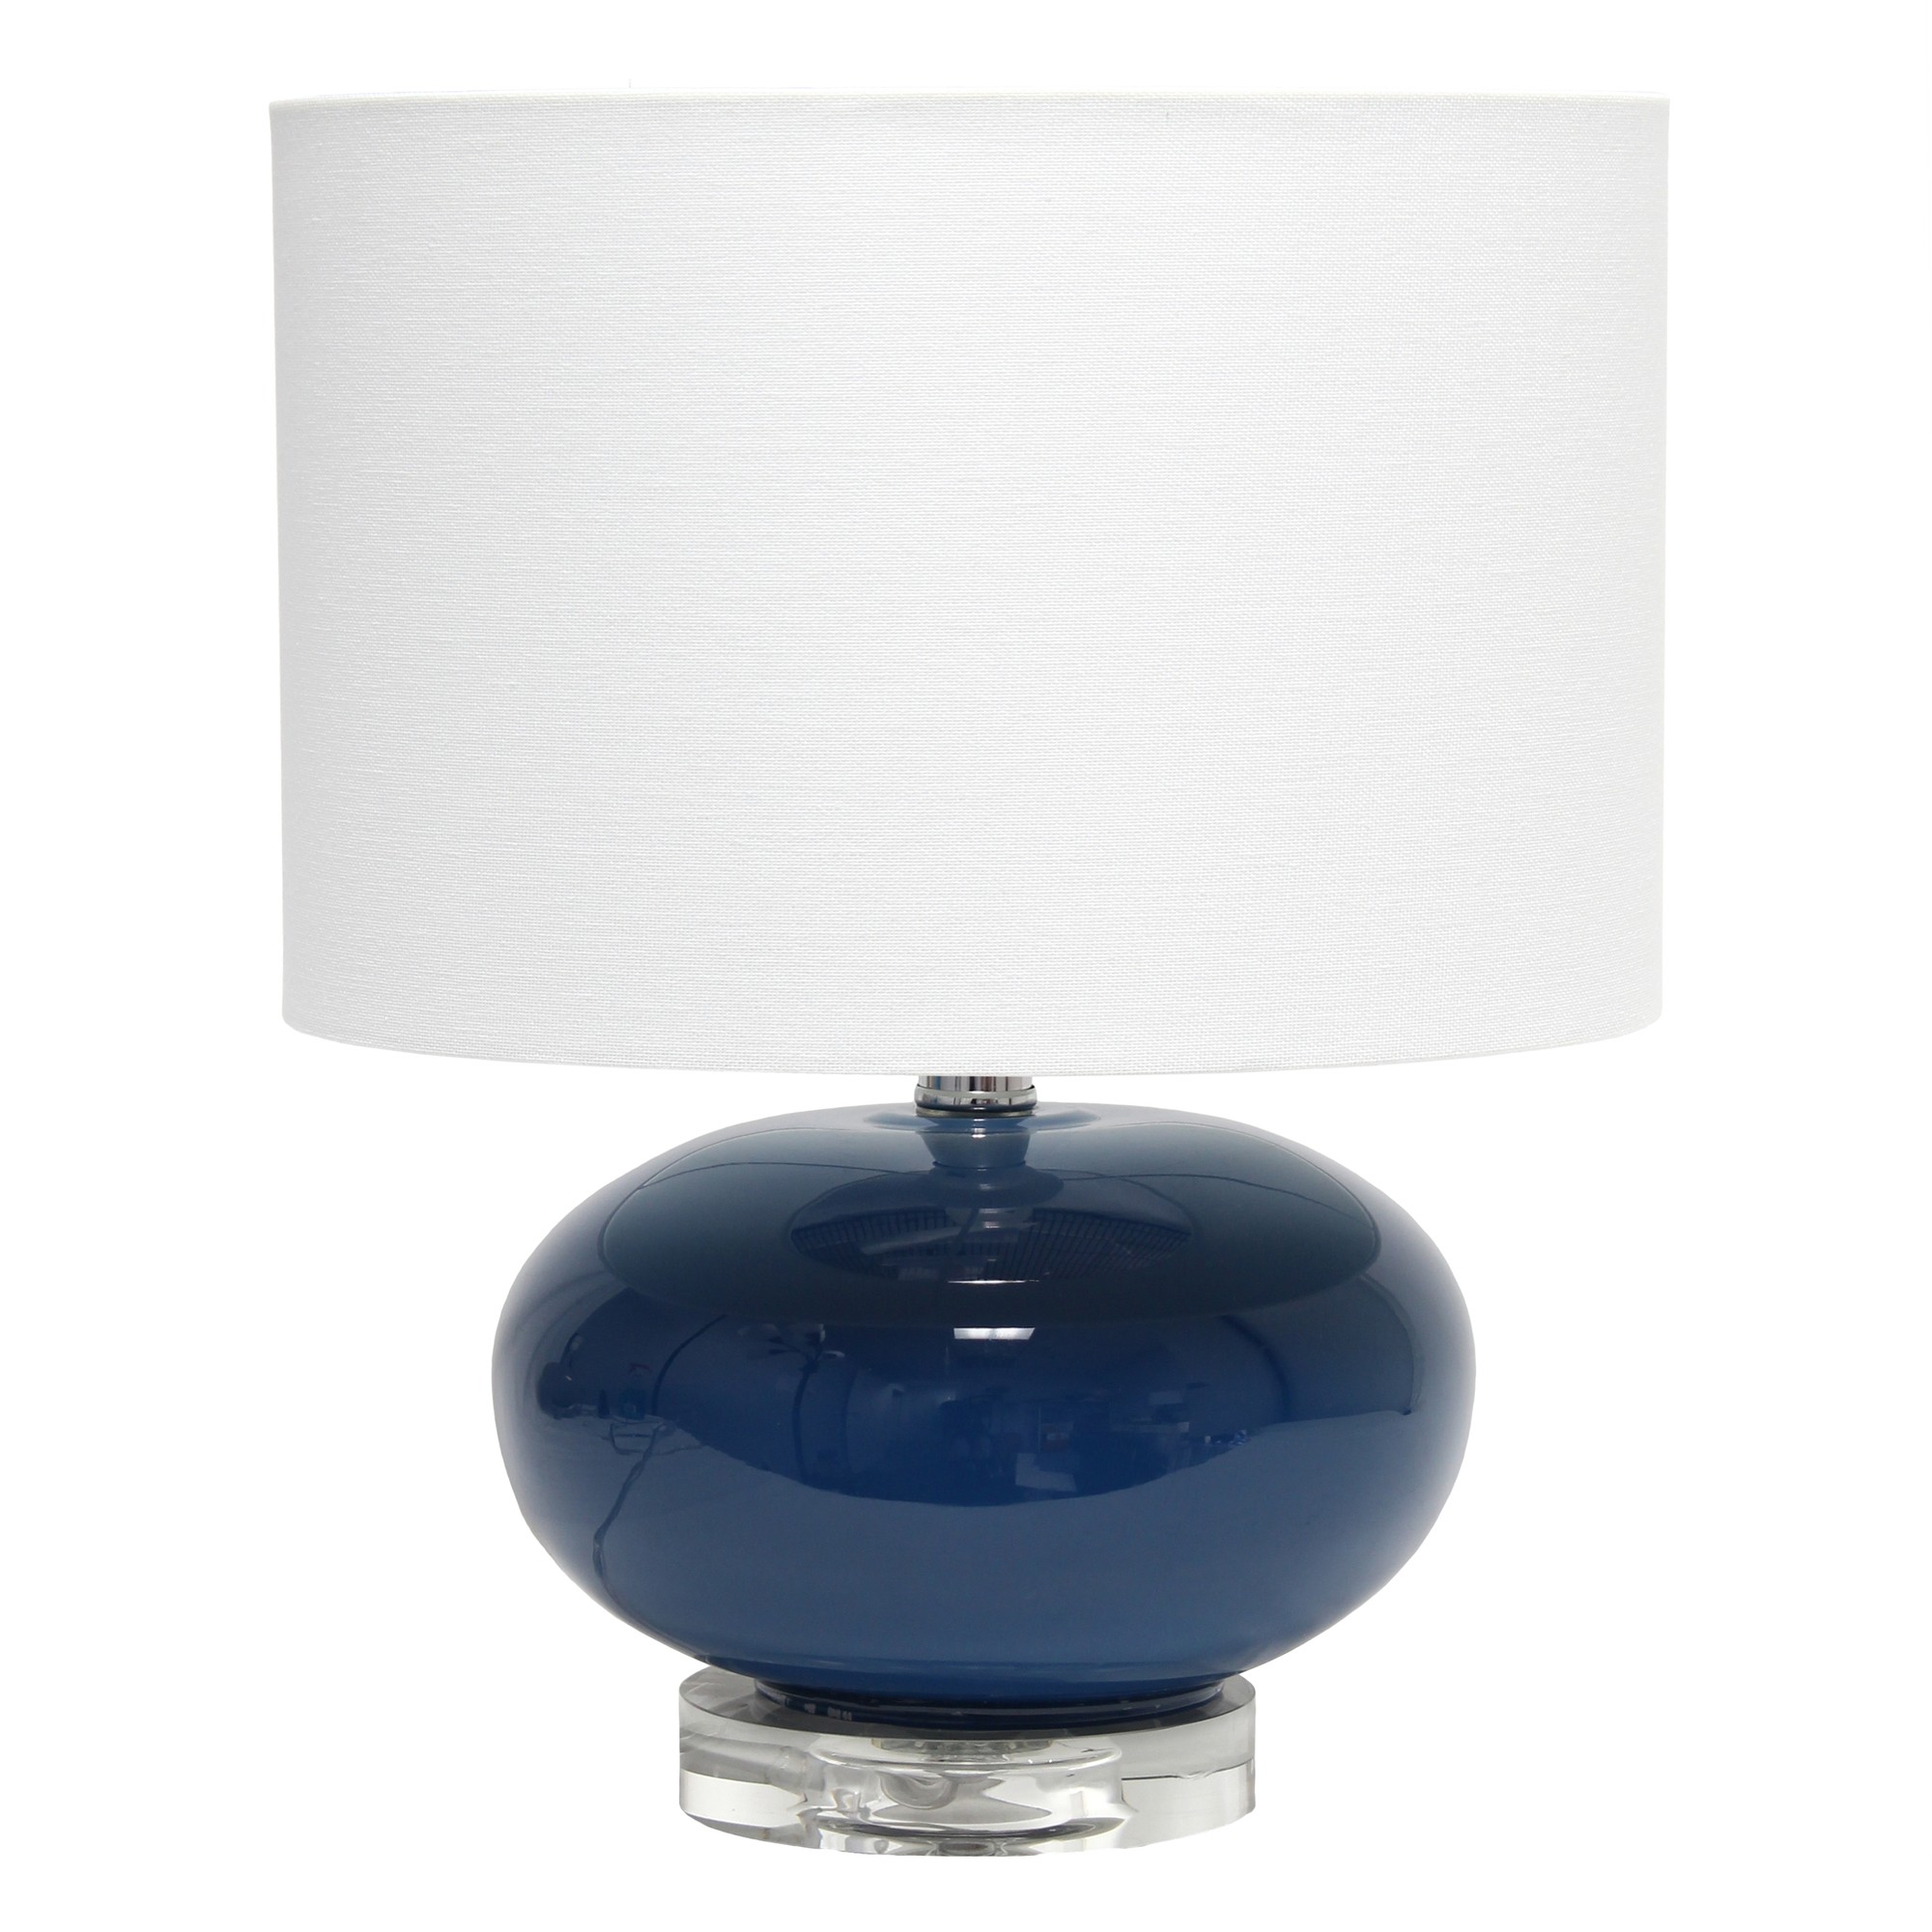 Lalia Home 15.25" Modern Ovaloid Glass Bedside Table Lamp with White Fabric Shade, Blue